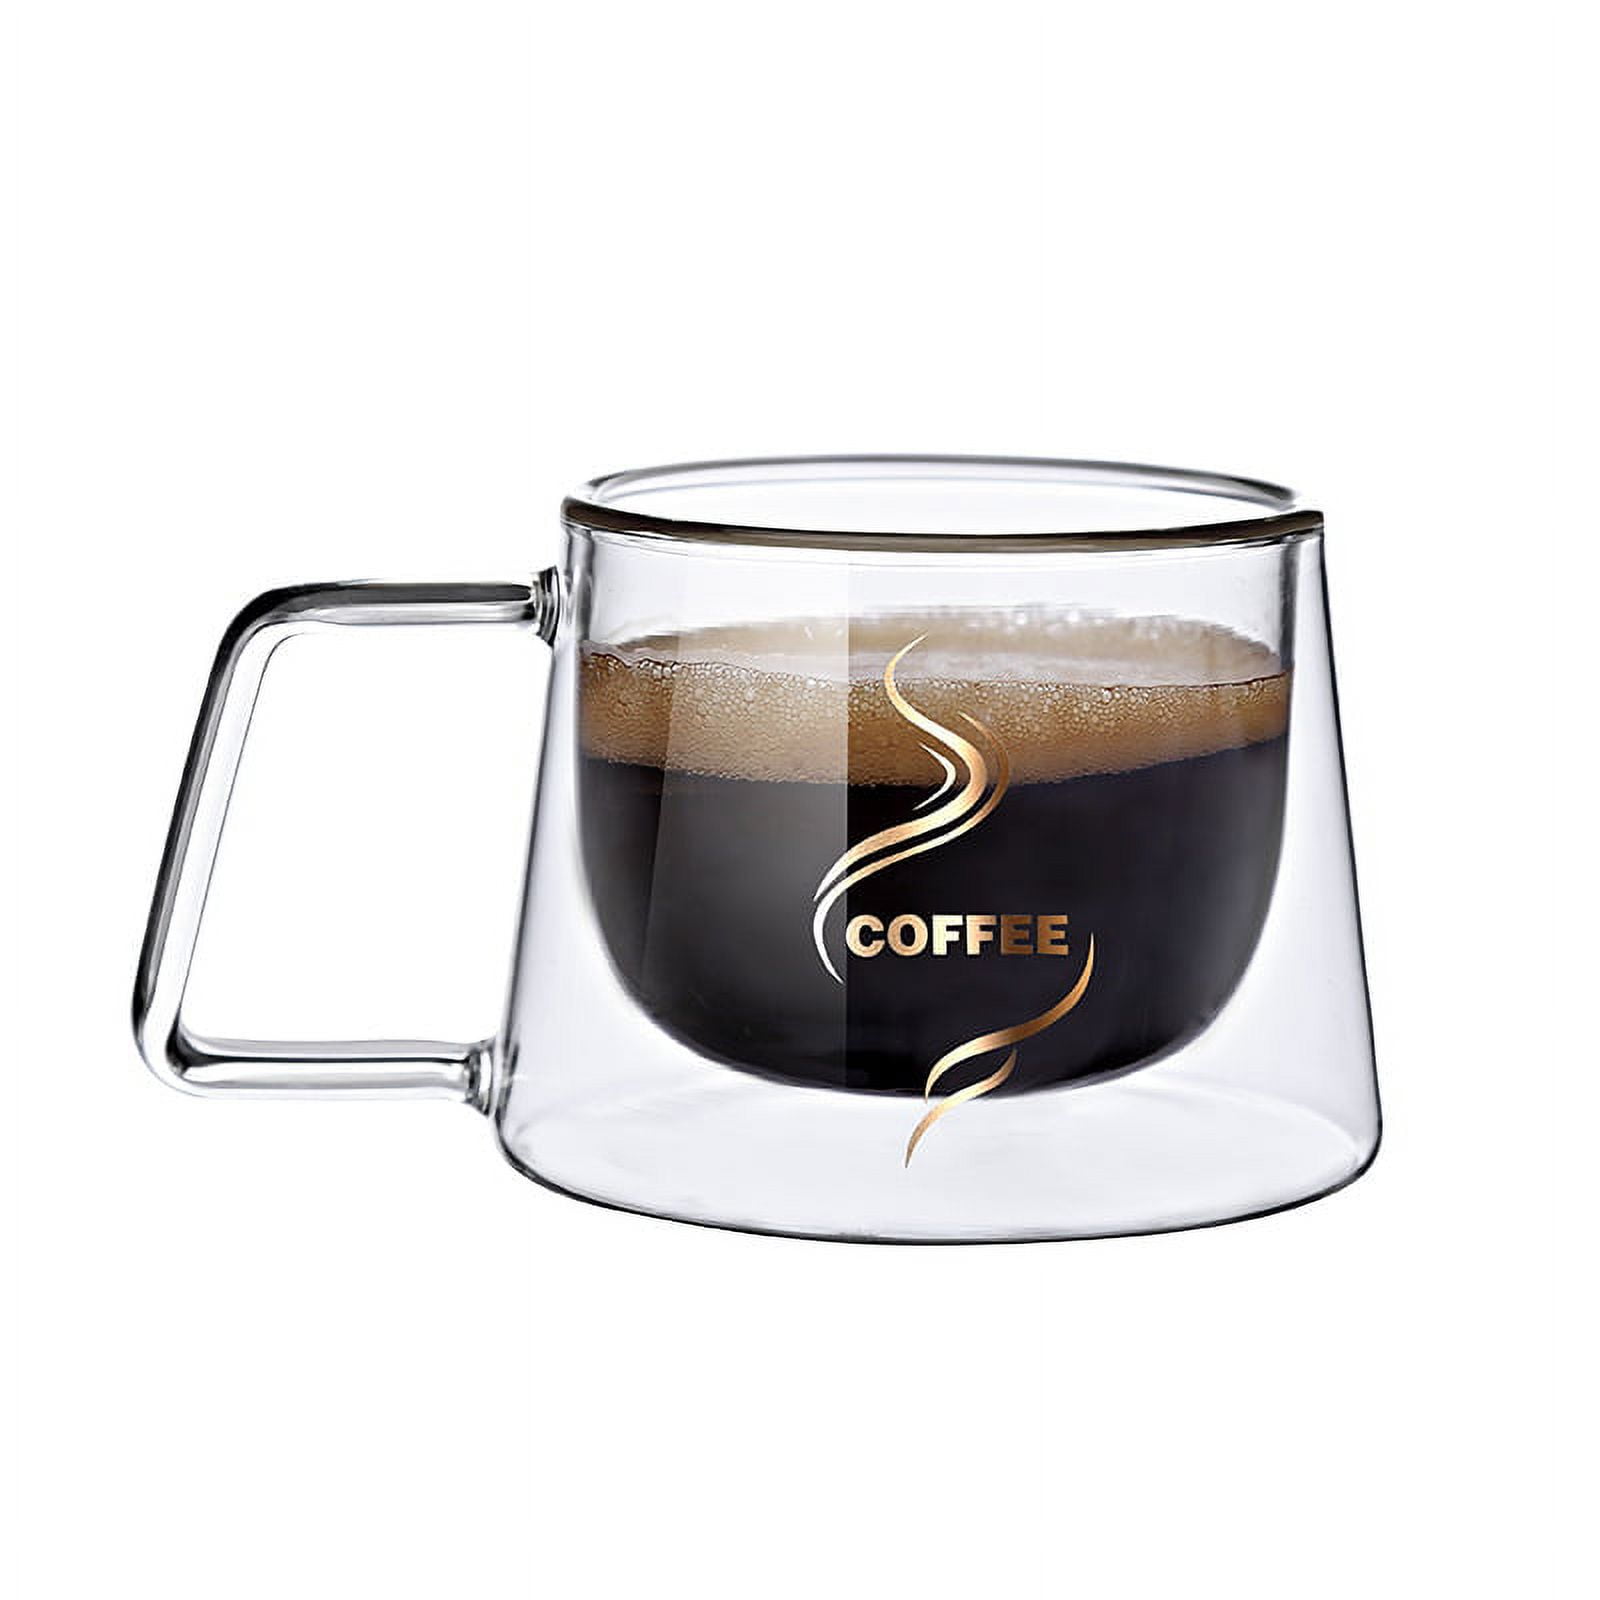 MEWAY 12oz/2 PACK Coffee Mugs,Clear Glass Double Wall Cup with handle for  Coffee, Tea, Latte, Cappuccino (12 oz，2)